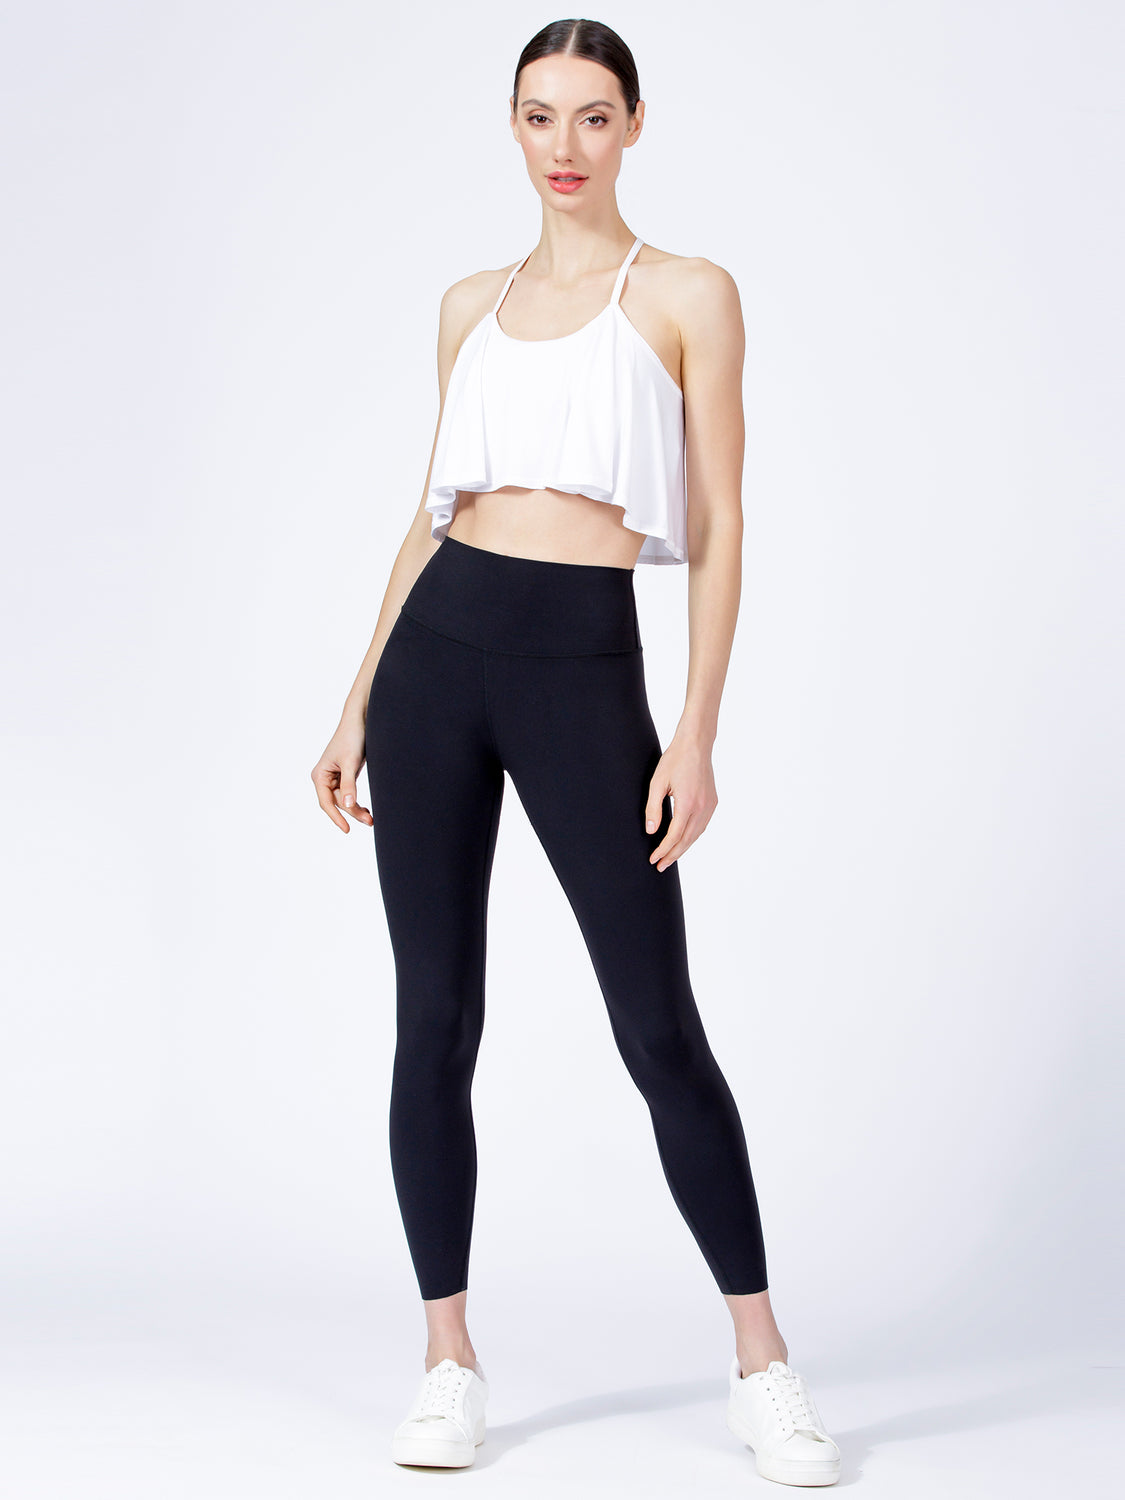 SANDS CROPPED TOP 2.0, WHITE